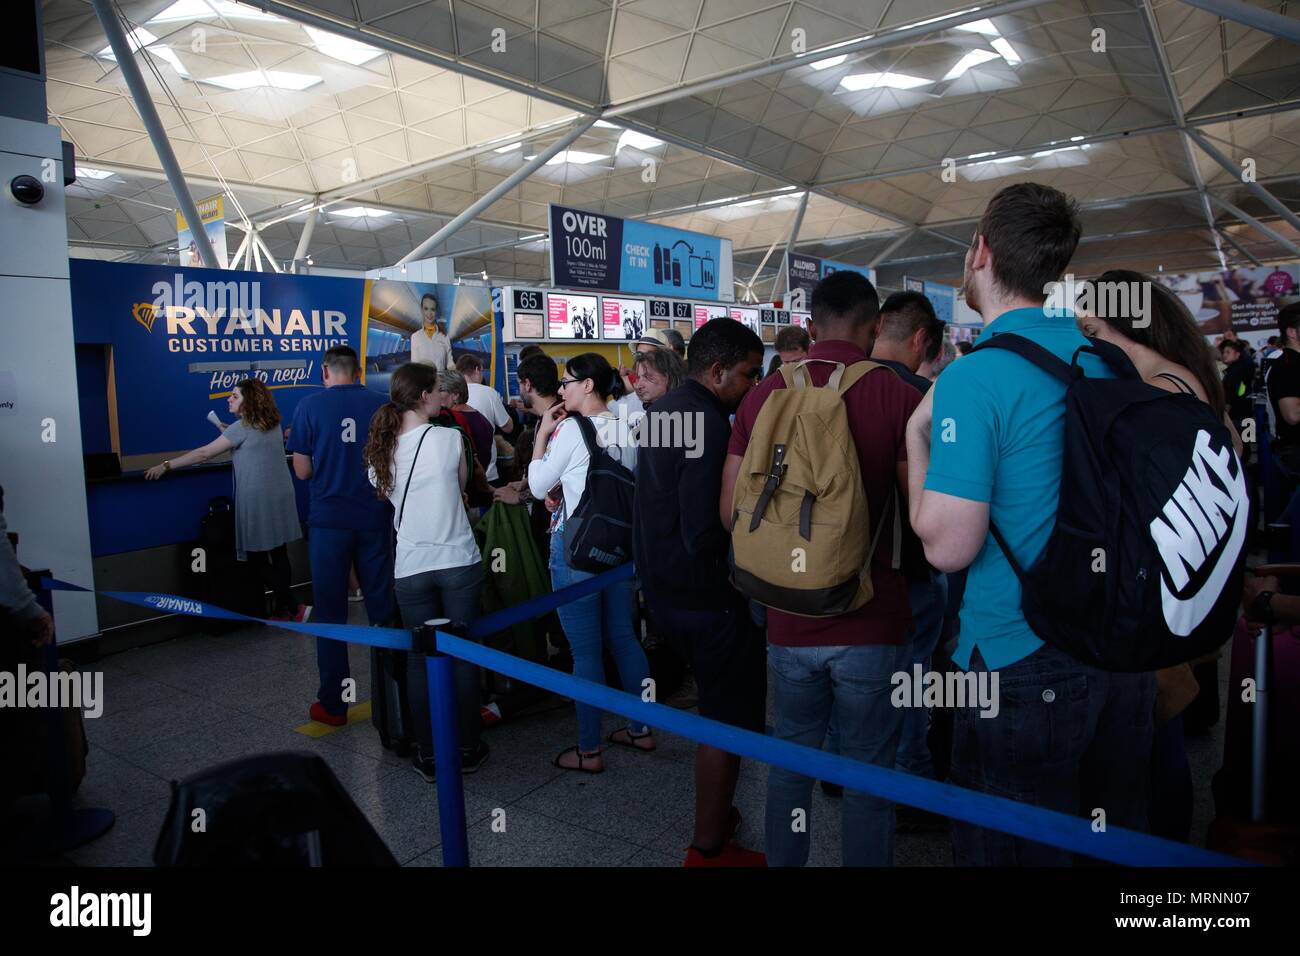 Stansted, UK. 27th May 2018. long queues at stansted airport due to Ryanair cancellations. Sunday 27 May 2018. Stephen Power / Alamy live News Stock Photo